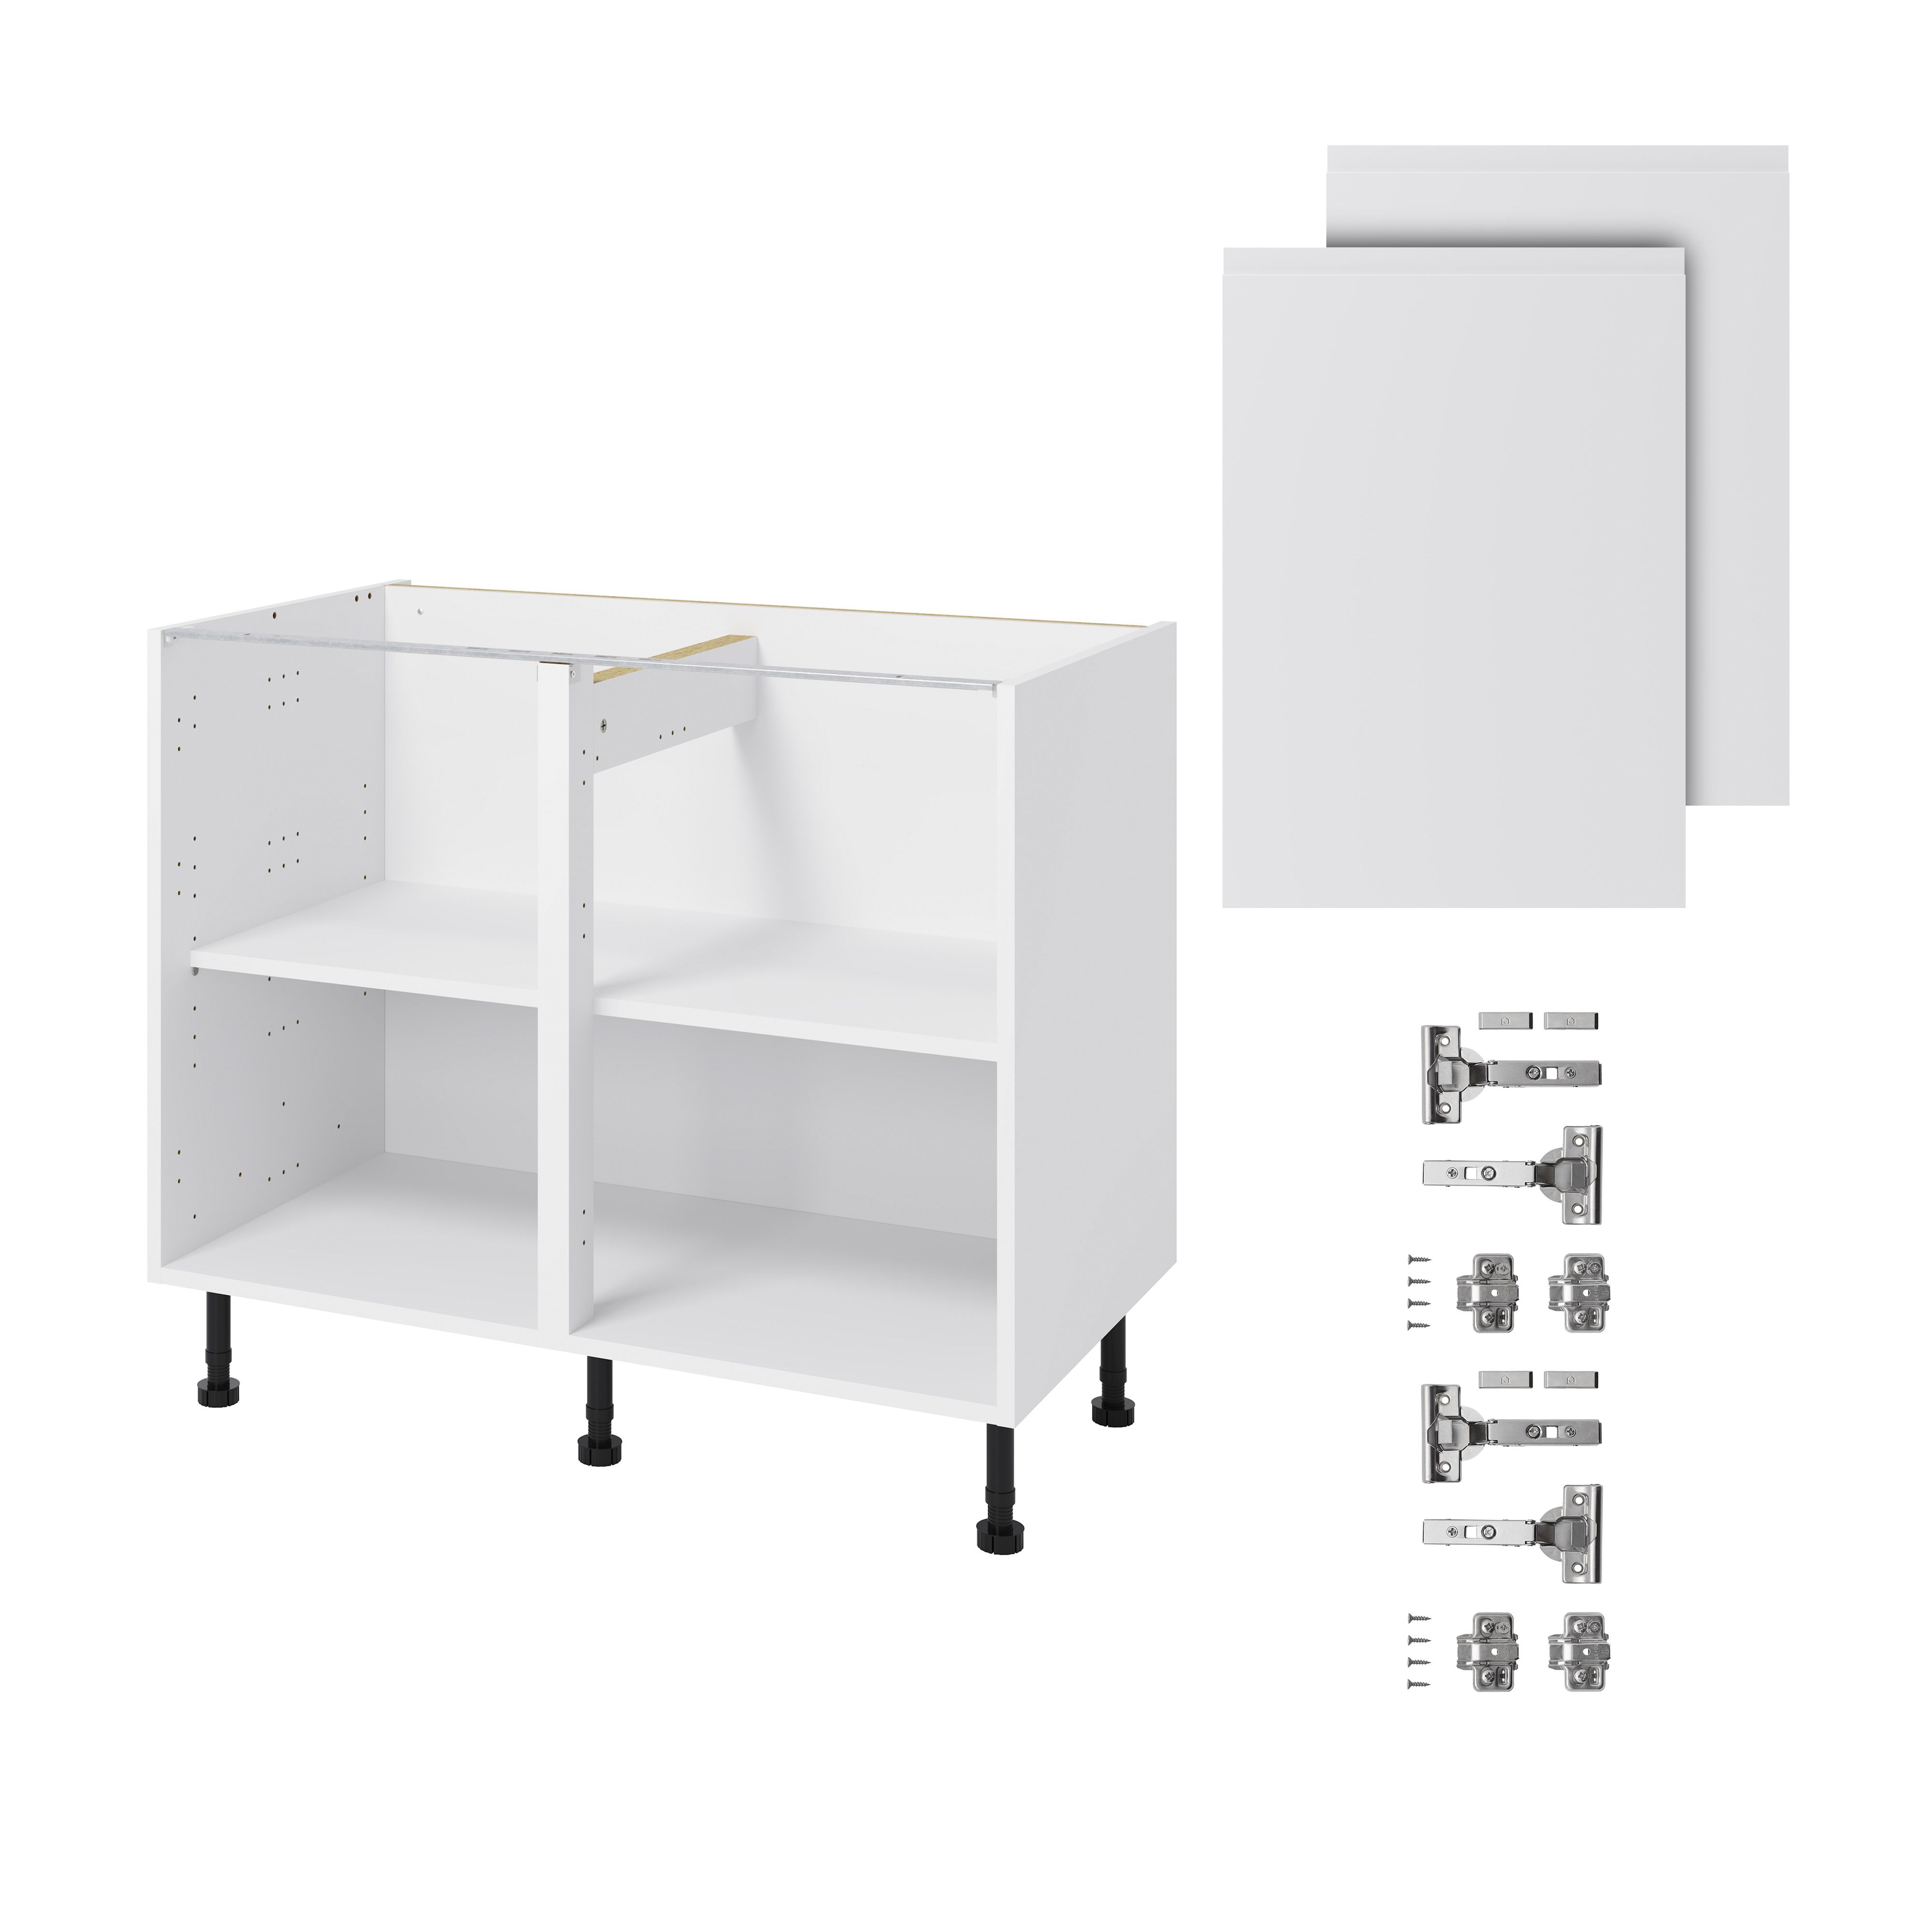 GoodHome Garcinia Gloss white integrated handle Base Kitchen cabinet (W)1000mm (H)720mm